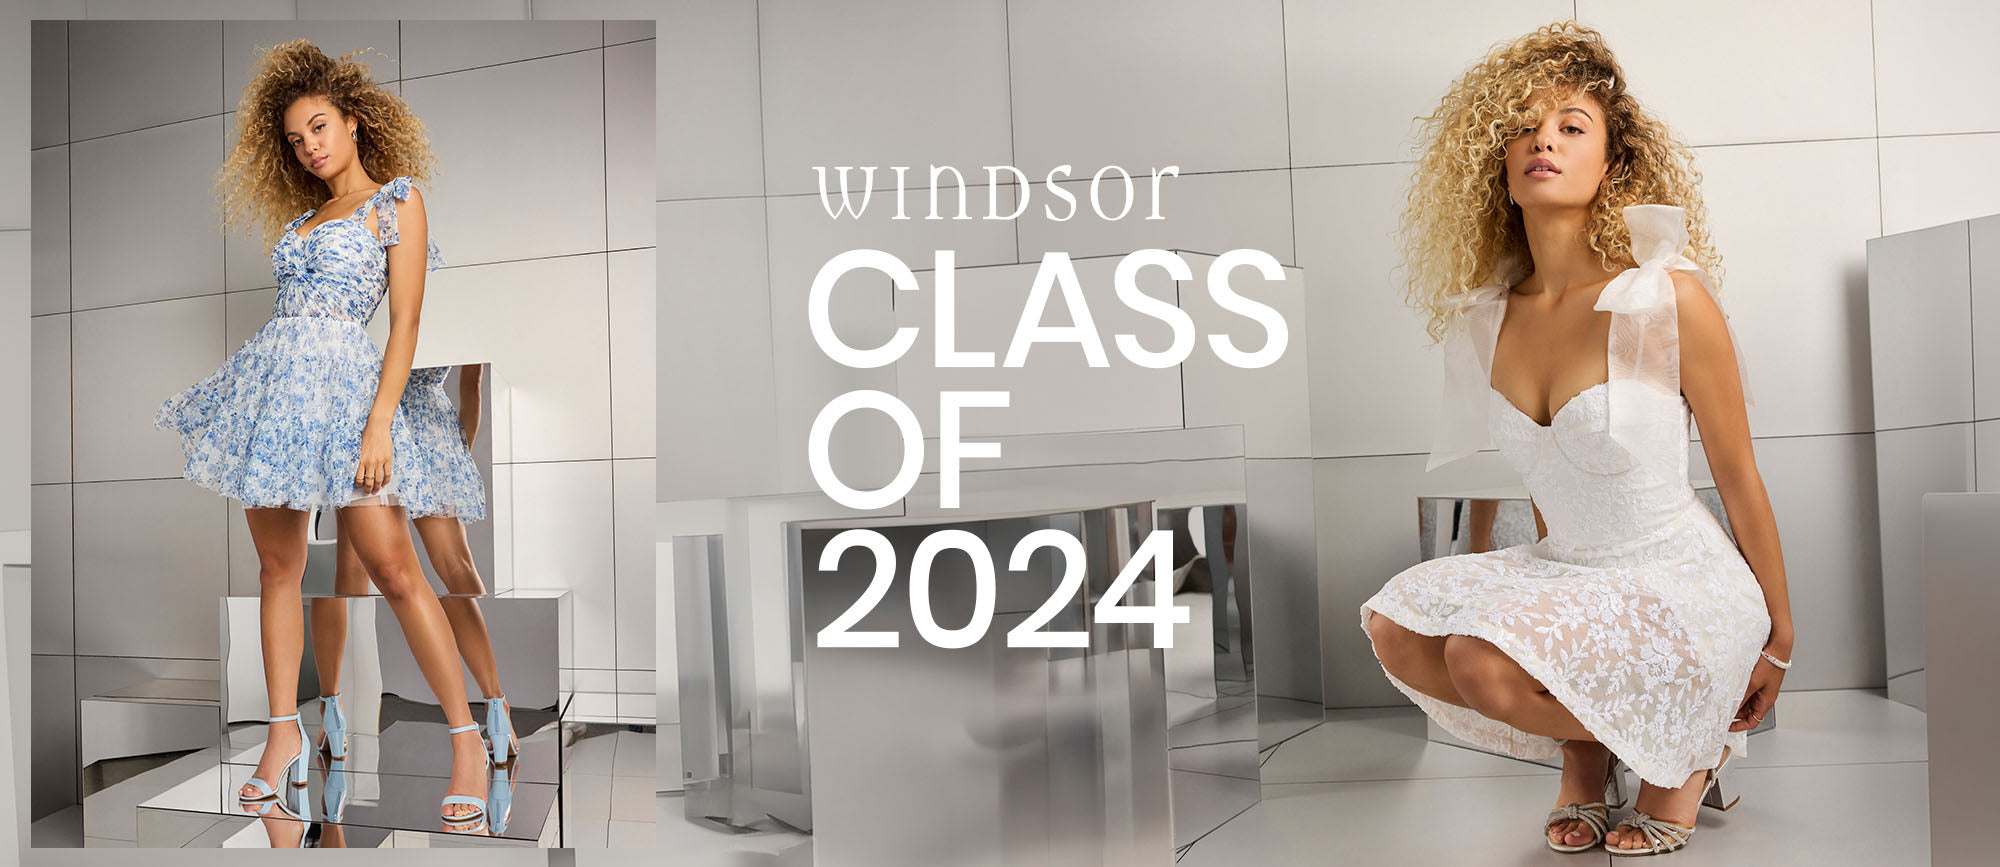 Celebrate in Windsor’s 2024 graduation dresses featuring white dresses in lace or chiffon, semi-formal designs in colorful prints, grad party dresses, stunning flowy to fitted dresses, and short to long lengths!